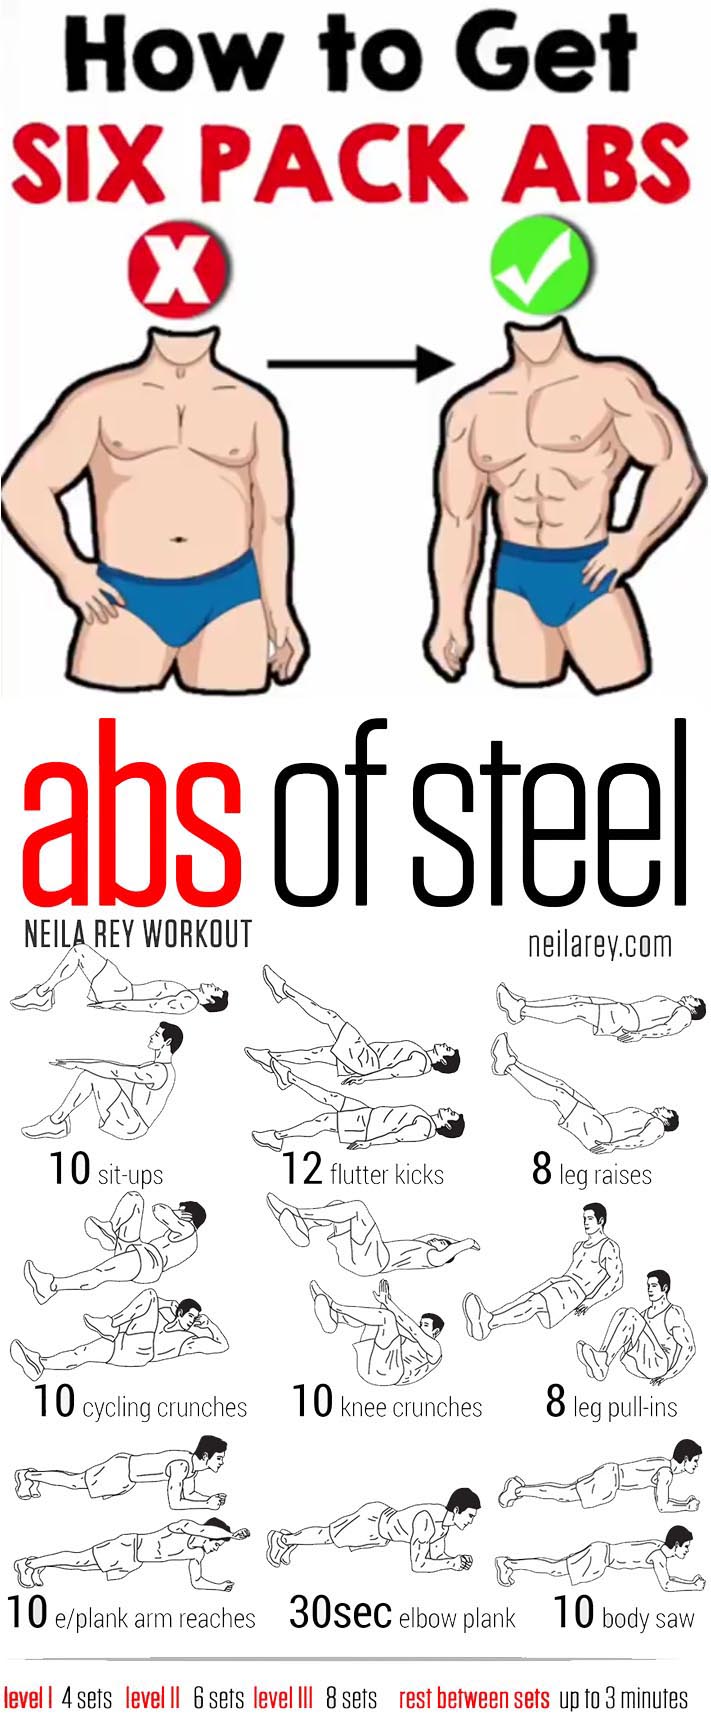 6 Pack ABS Picture Guide